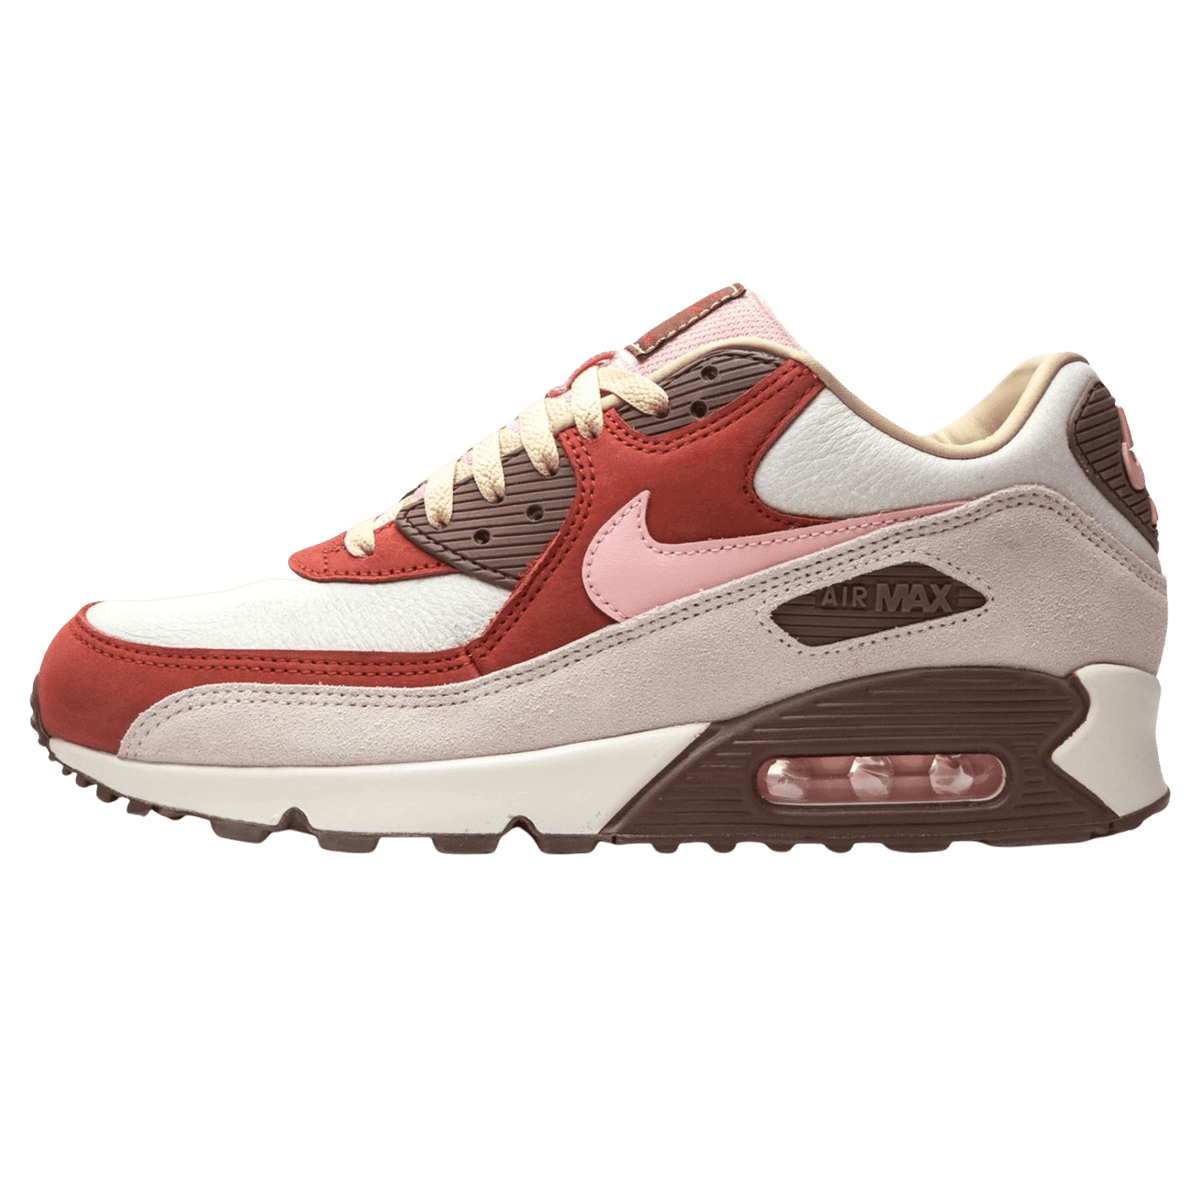 DQM x Nike Nike Air Max 1 Curry Pack Olive 27cm 'Bacon' 2021 - UrlfreezeShops